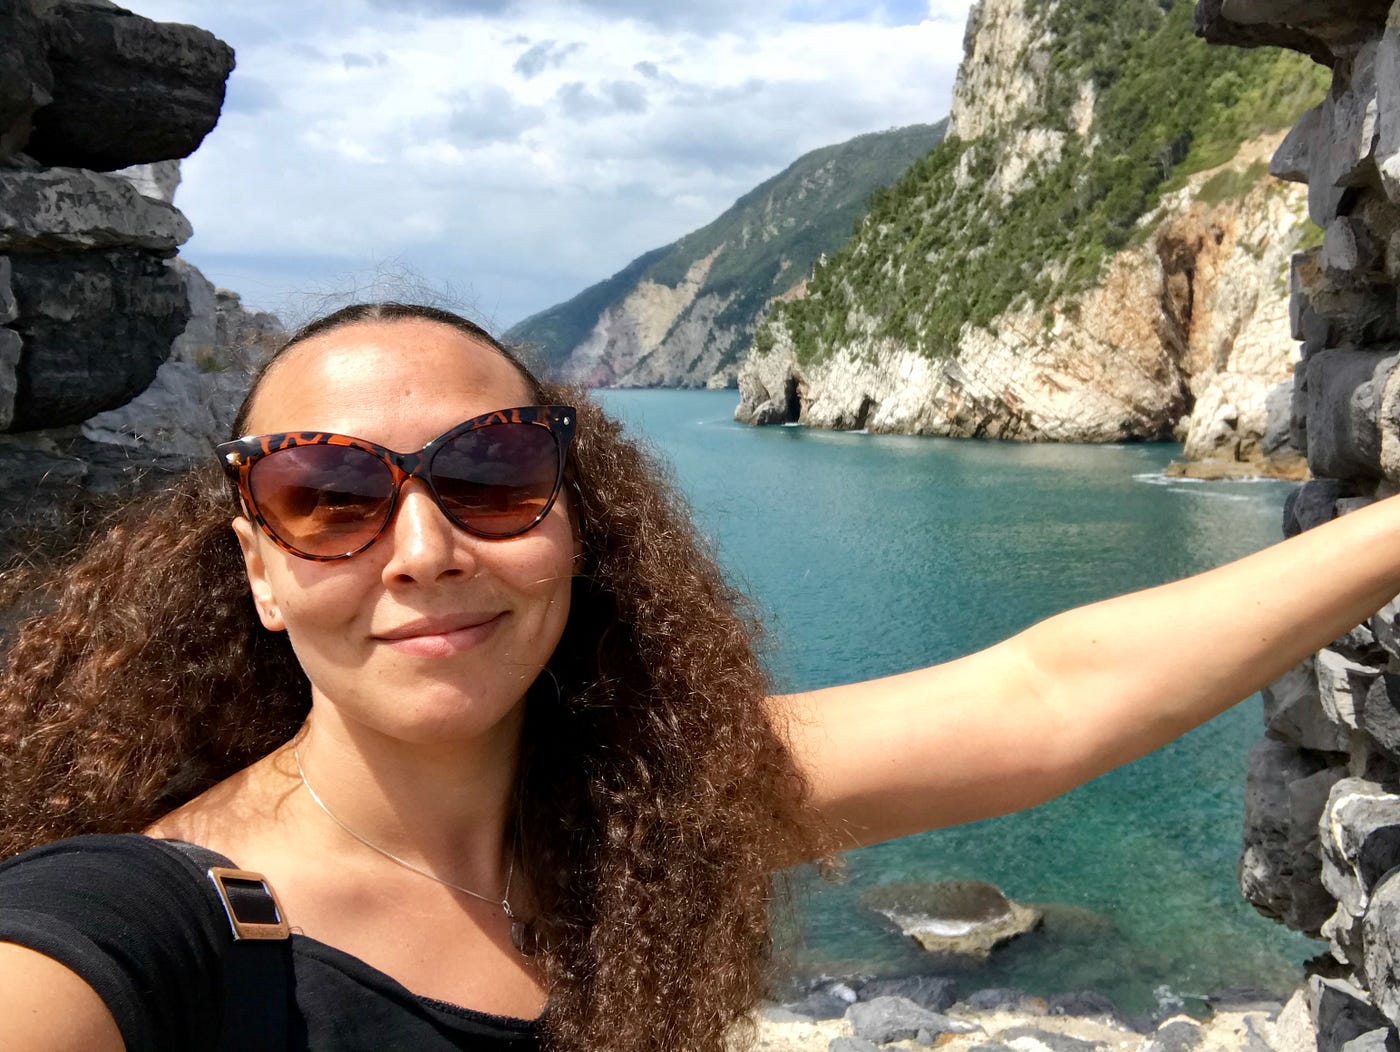 How Falling In and Out of Love With Italy Made Me See More Clearly, by KL  Simmons, Travel Memoirs